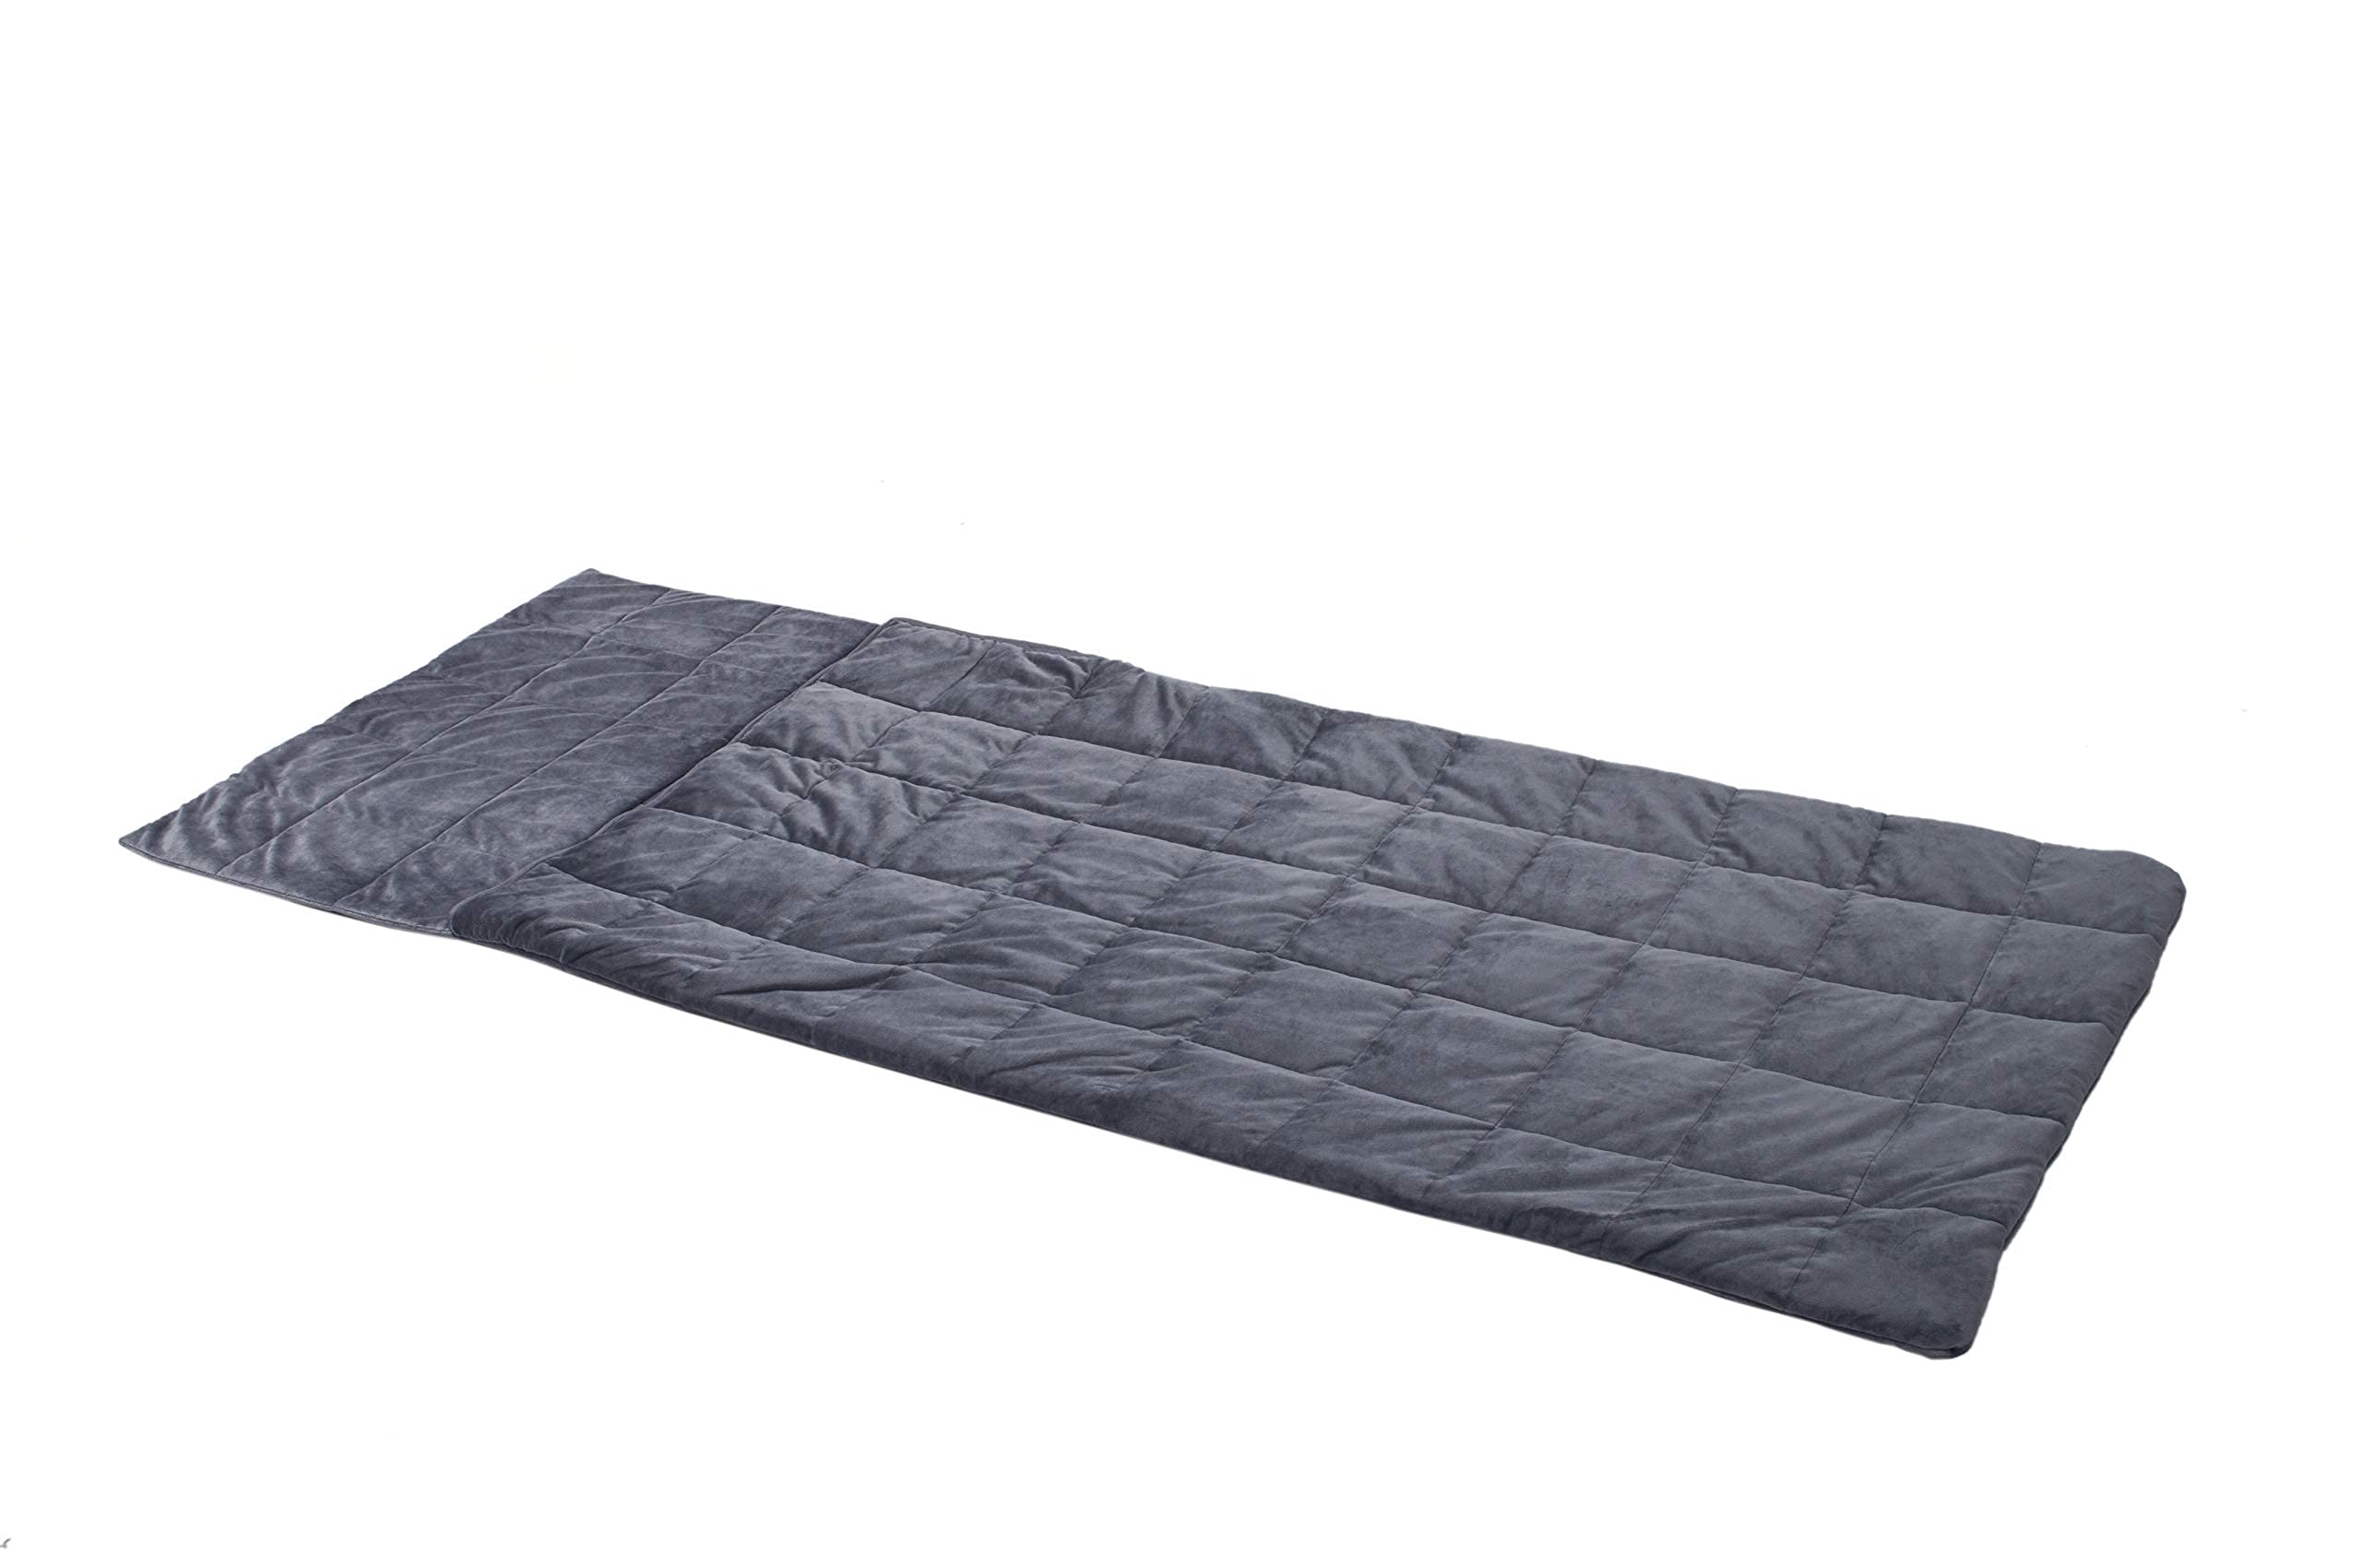 ZooVaa Weighted Sleeping Bag - Soft Microfiber Minky Weighted Blanket 13LB Compression Camping Blanket with Glass Beads for Kids and Small Adults (30x80” Dark Gray)